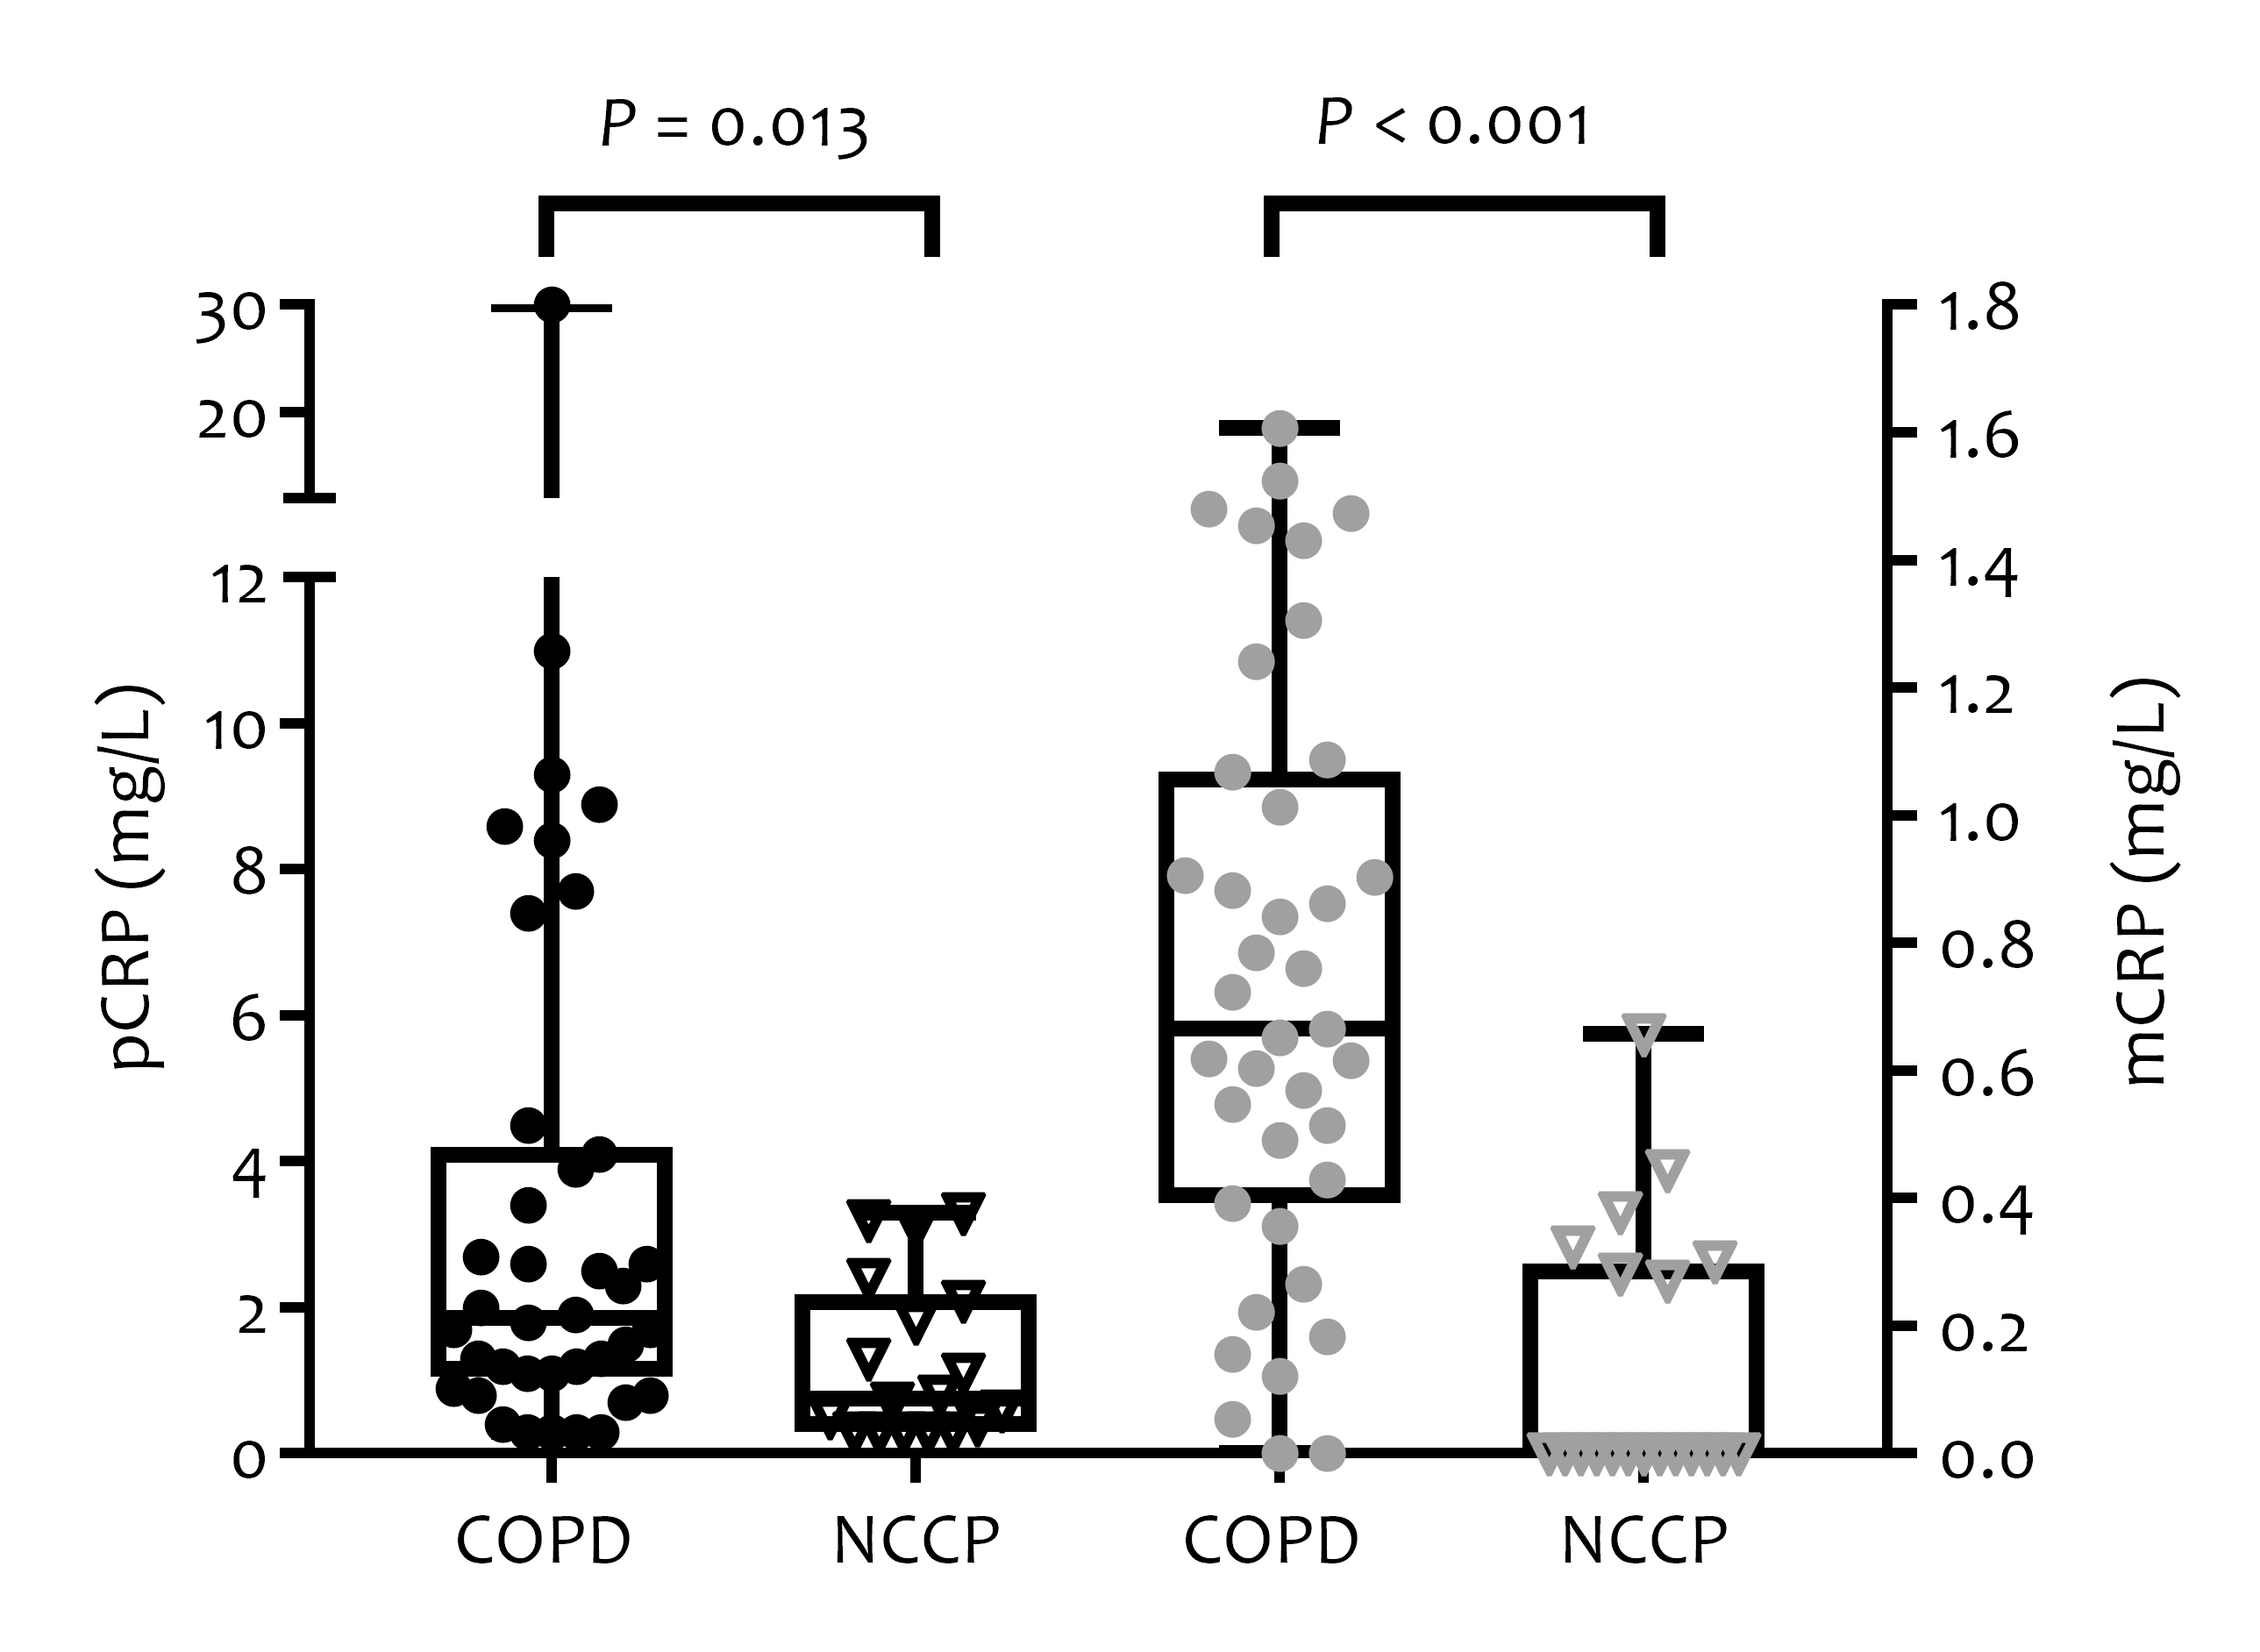 pCRP and mCRP niveaus in COPD and niet-COPD controlepersonen (NCCP) cohorten